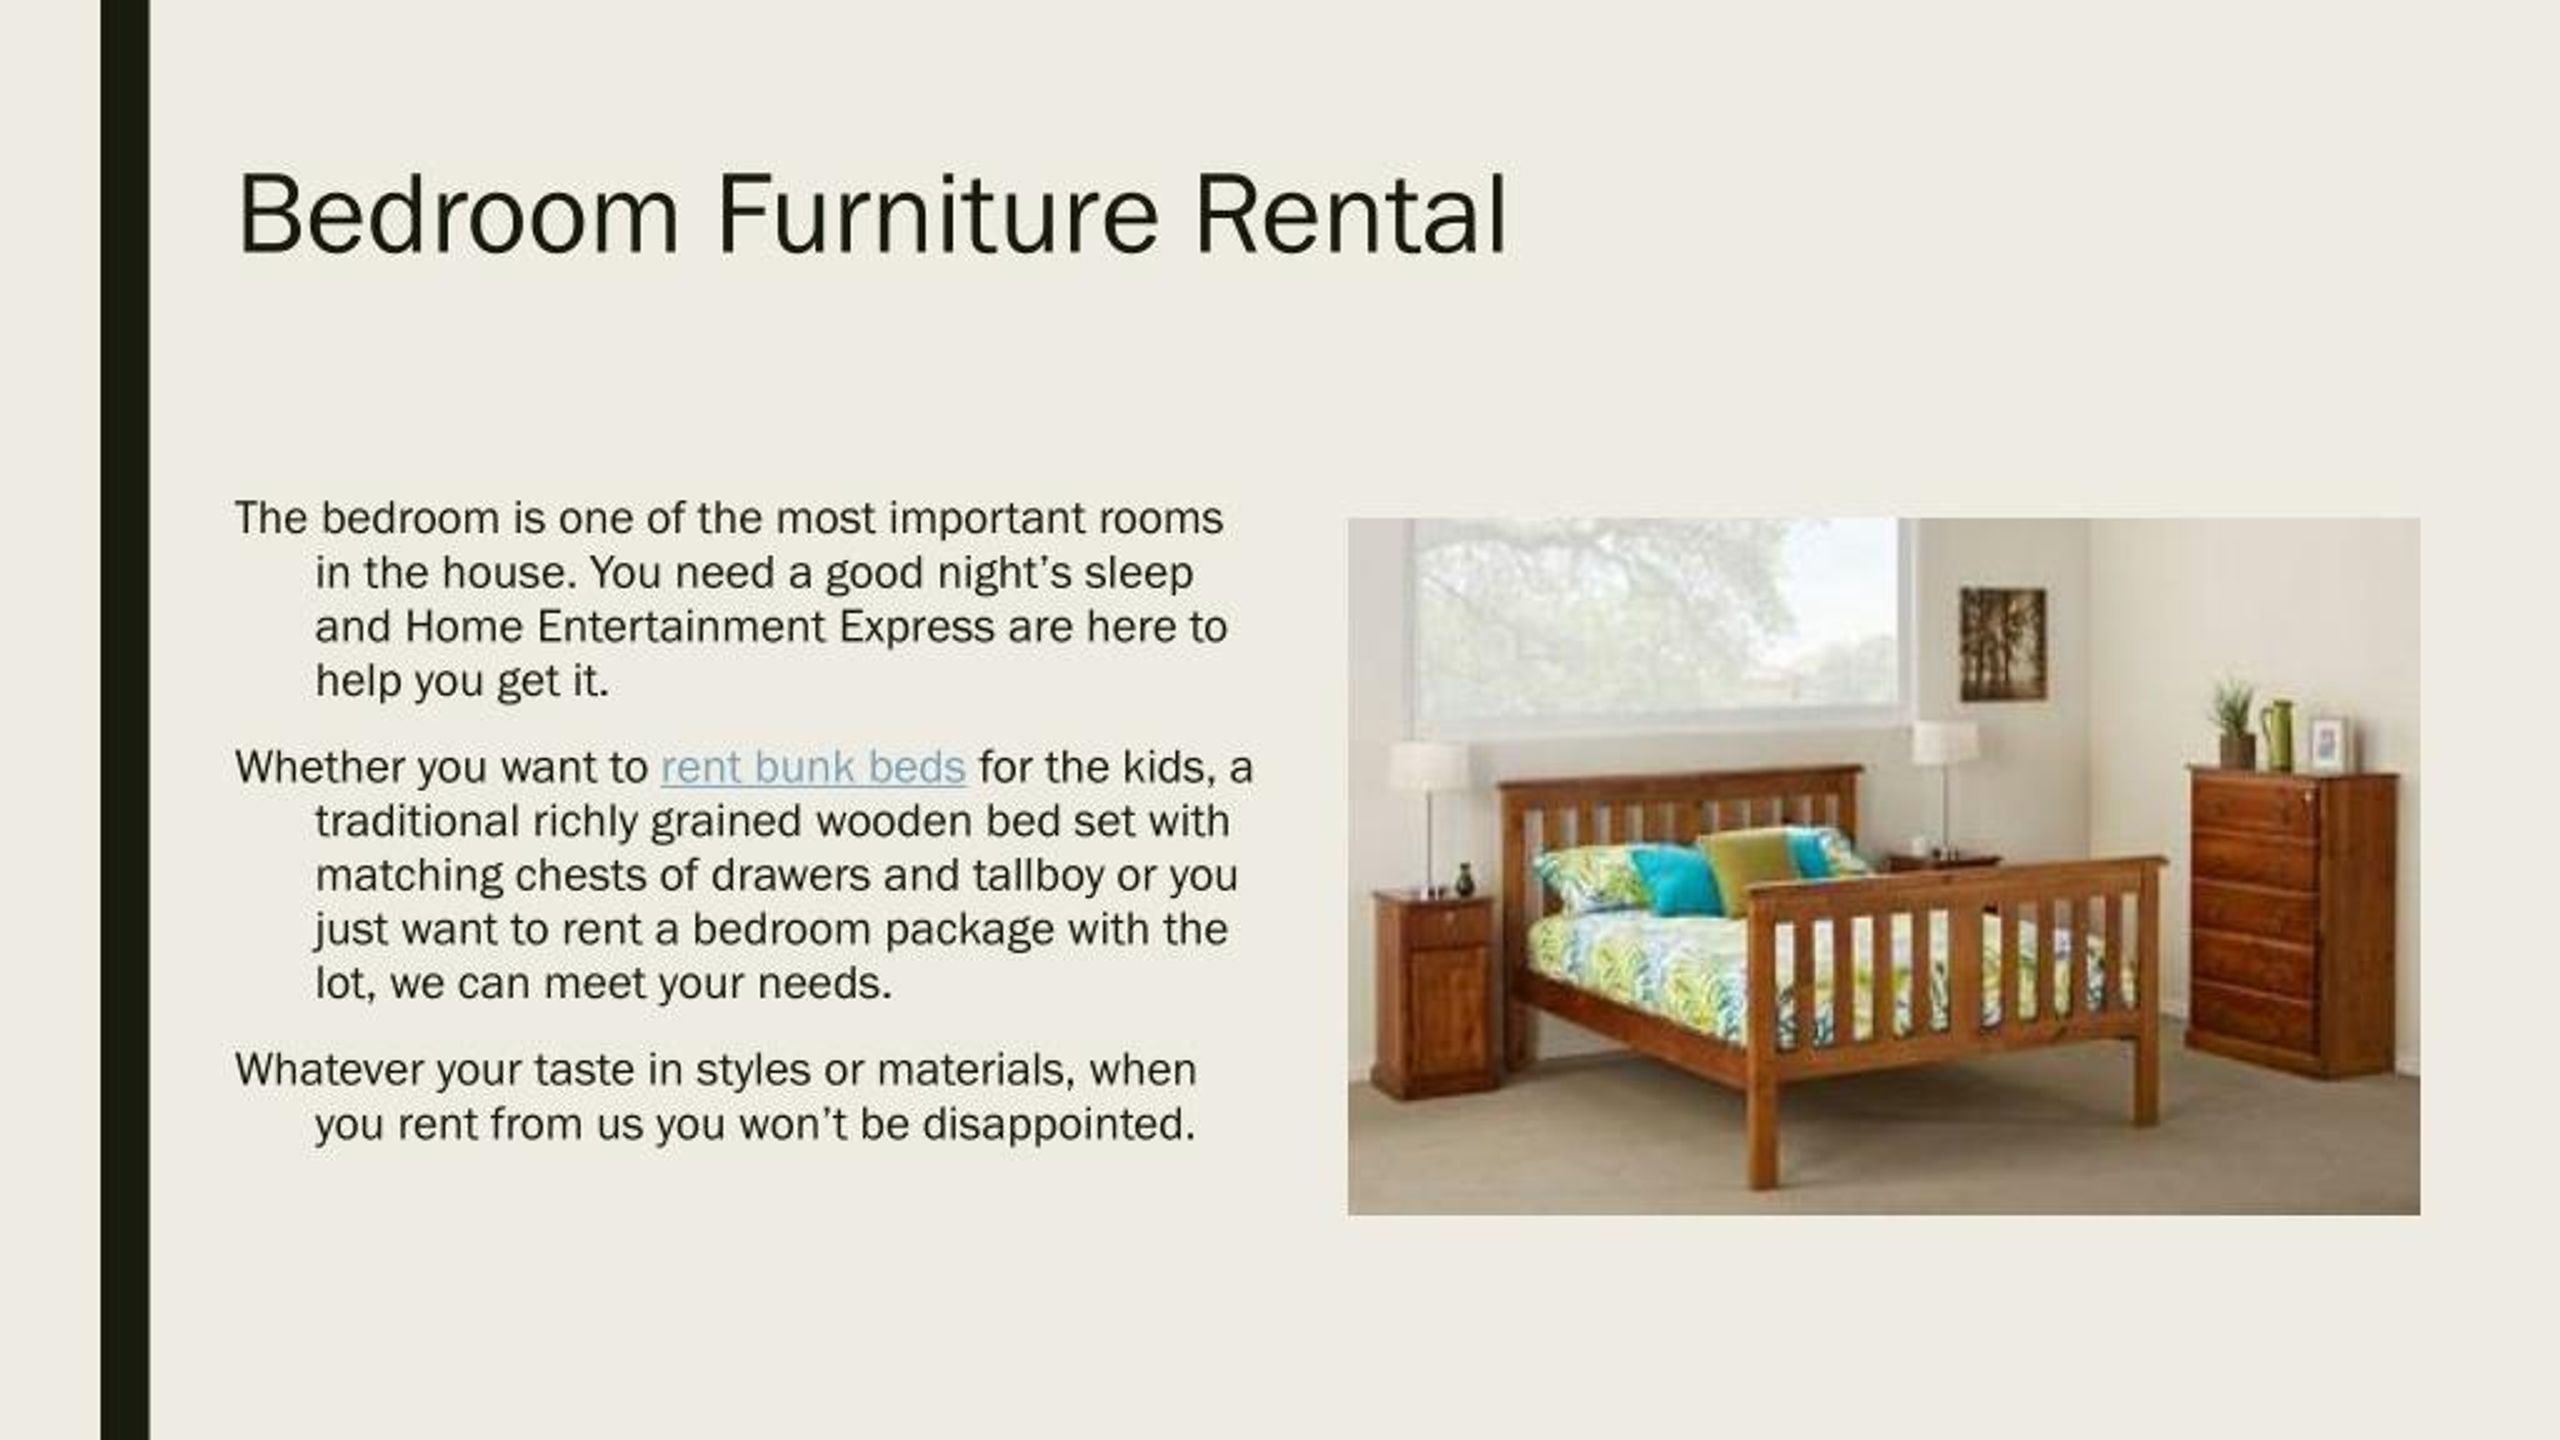 Ppt Home Entertainment Express Furniture Rental Powerpoint